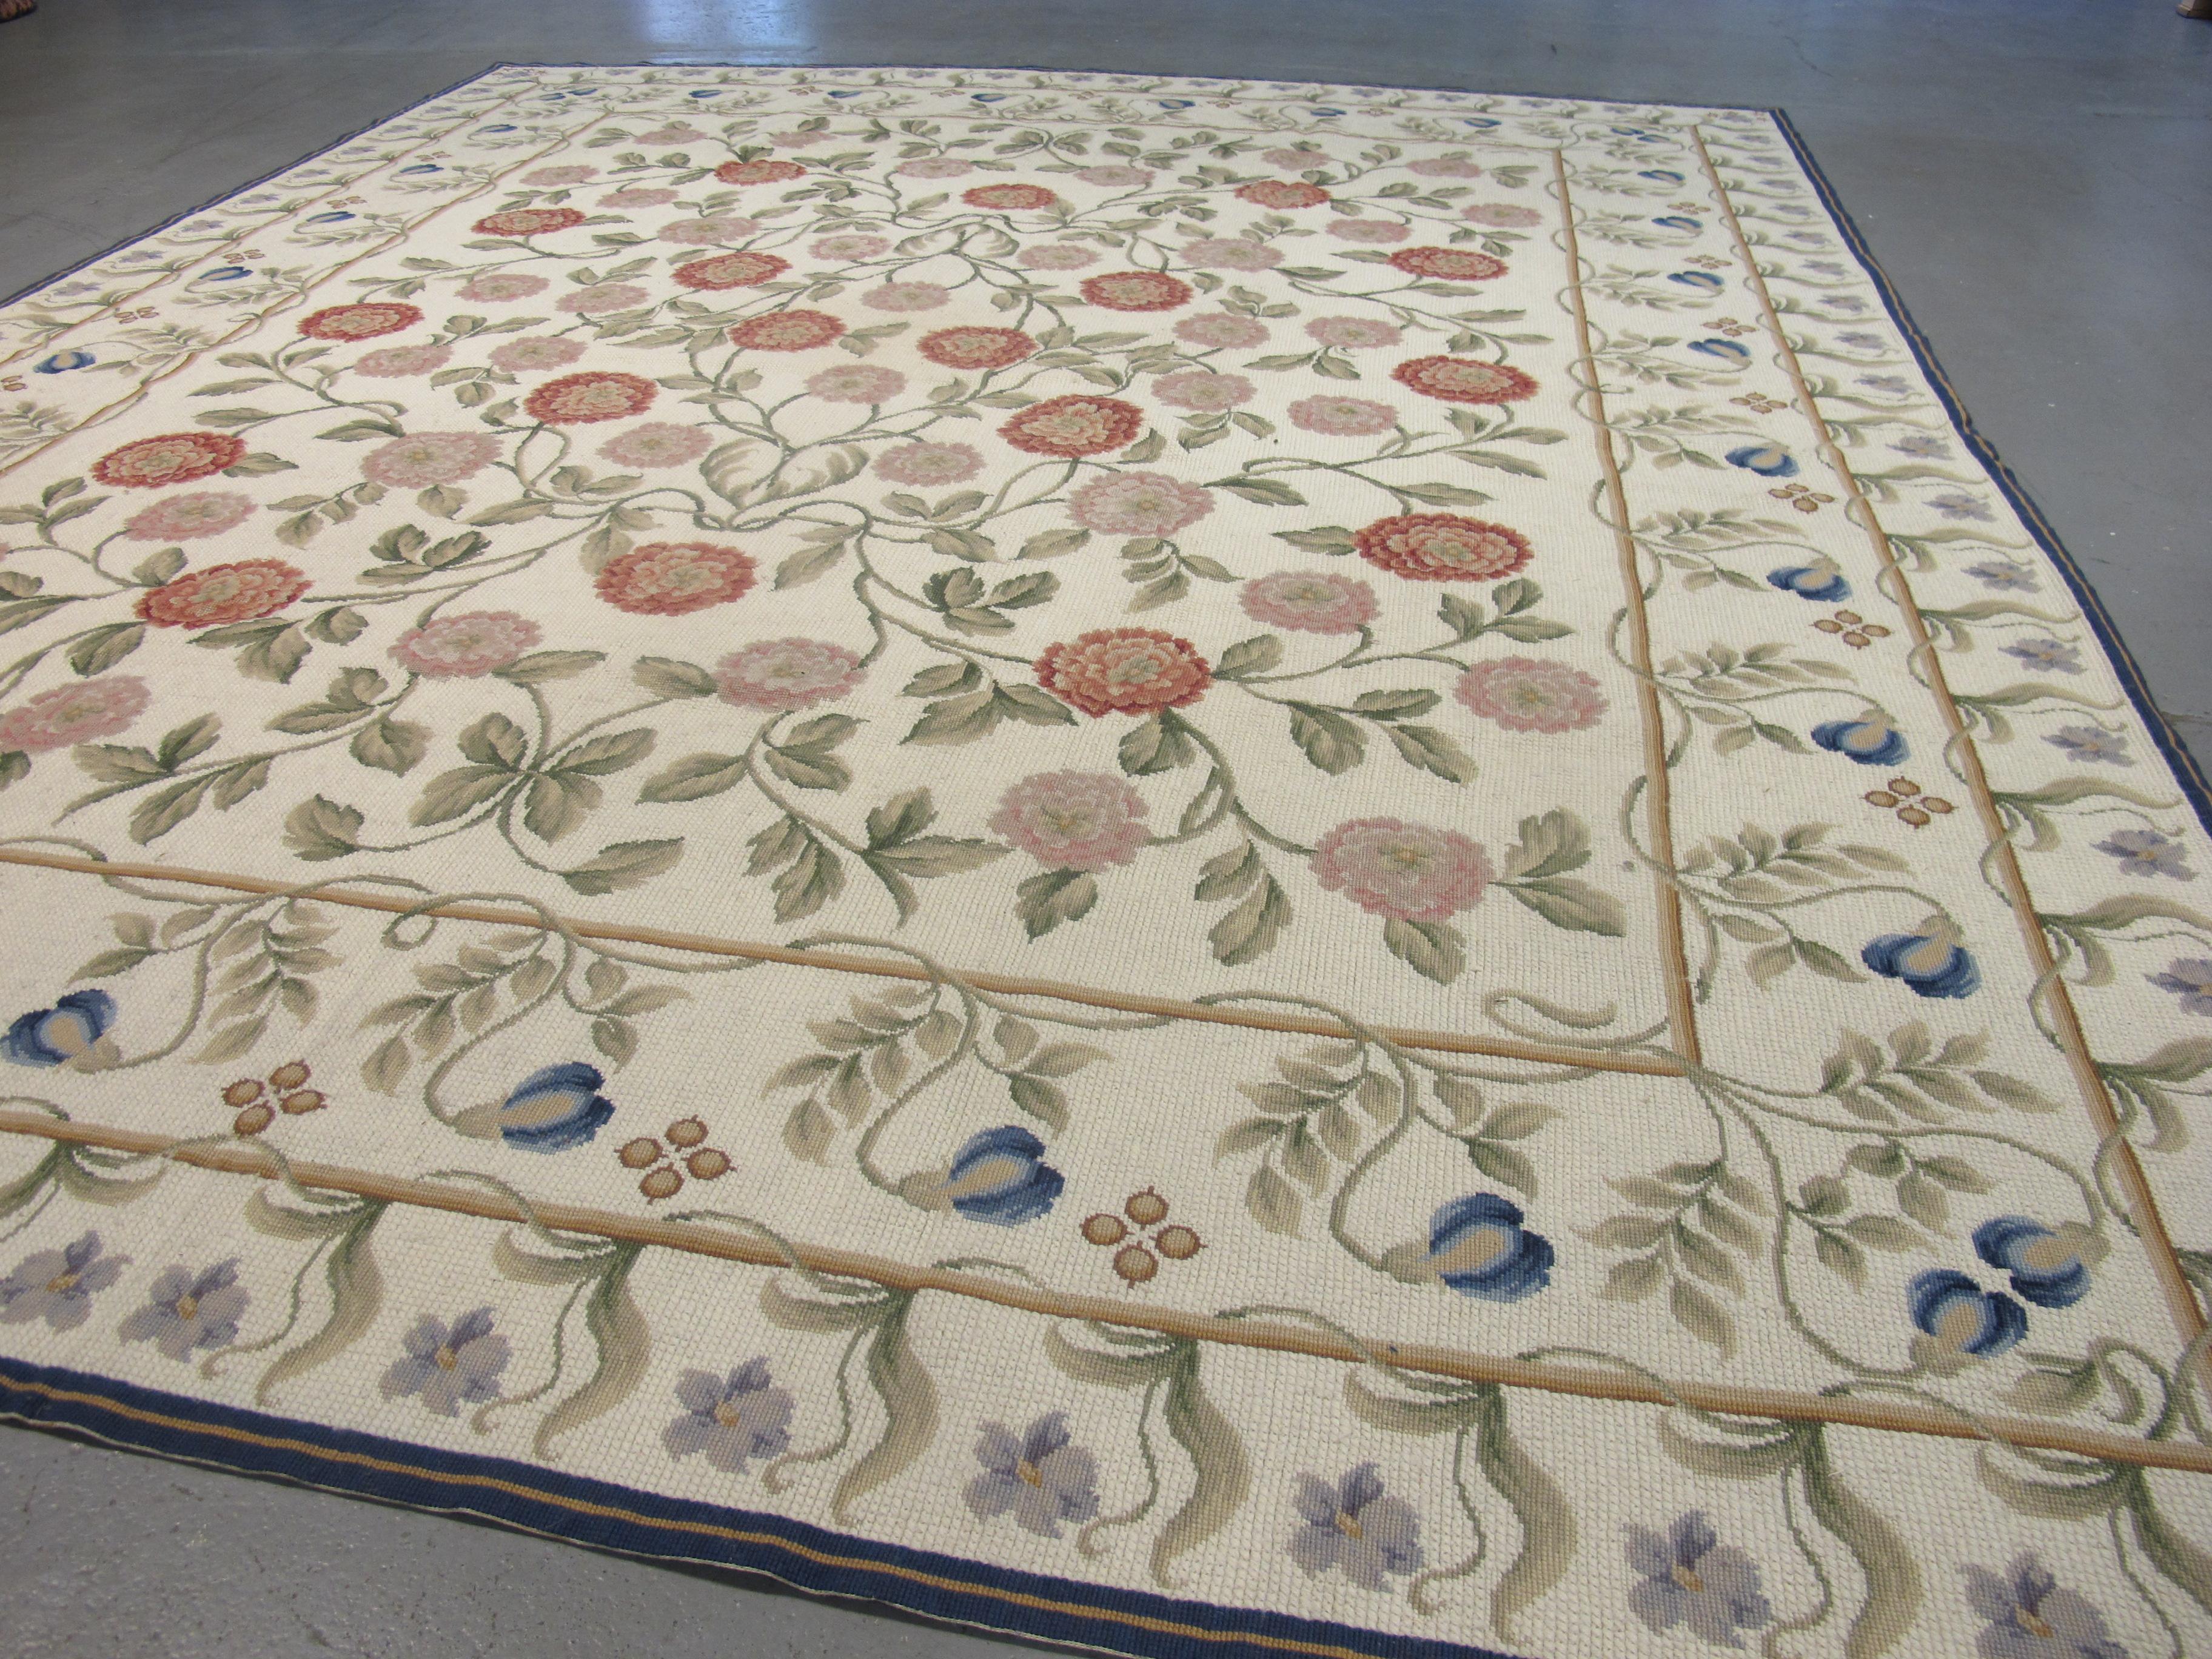 Fine Vintage Portuguese Needlepoint Carpet In Excellent Condition For Sale In London, GB